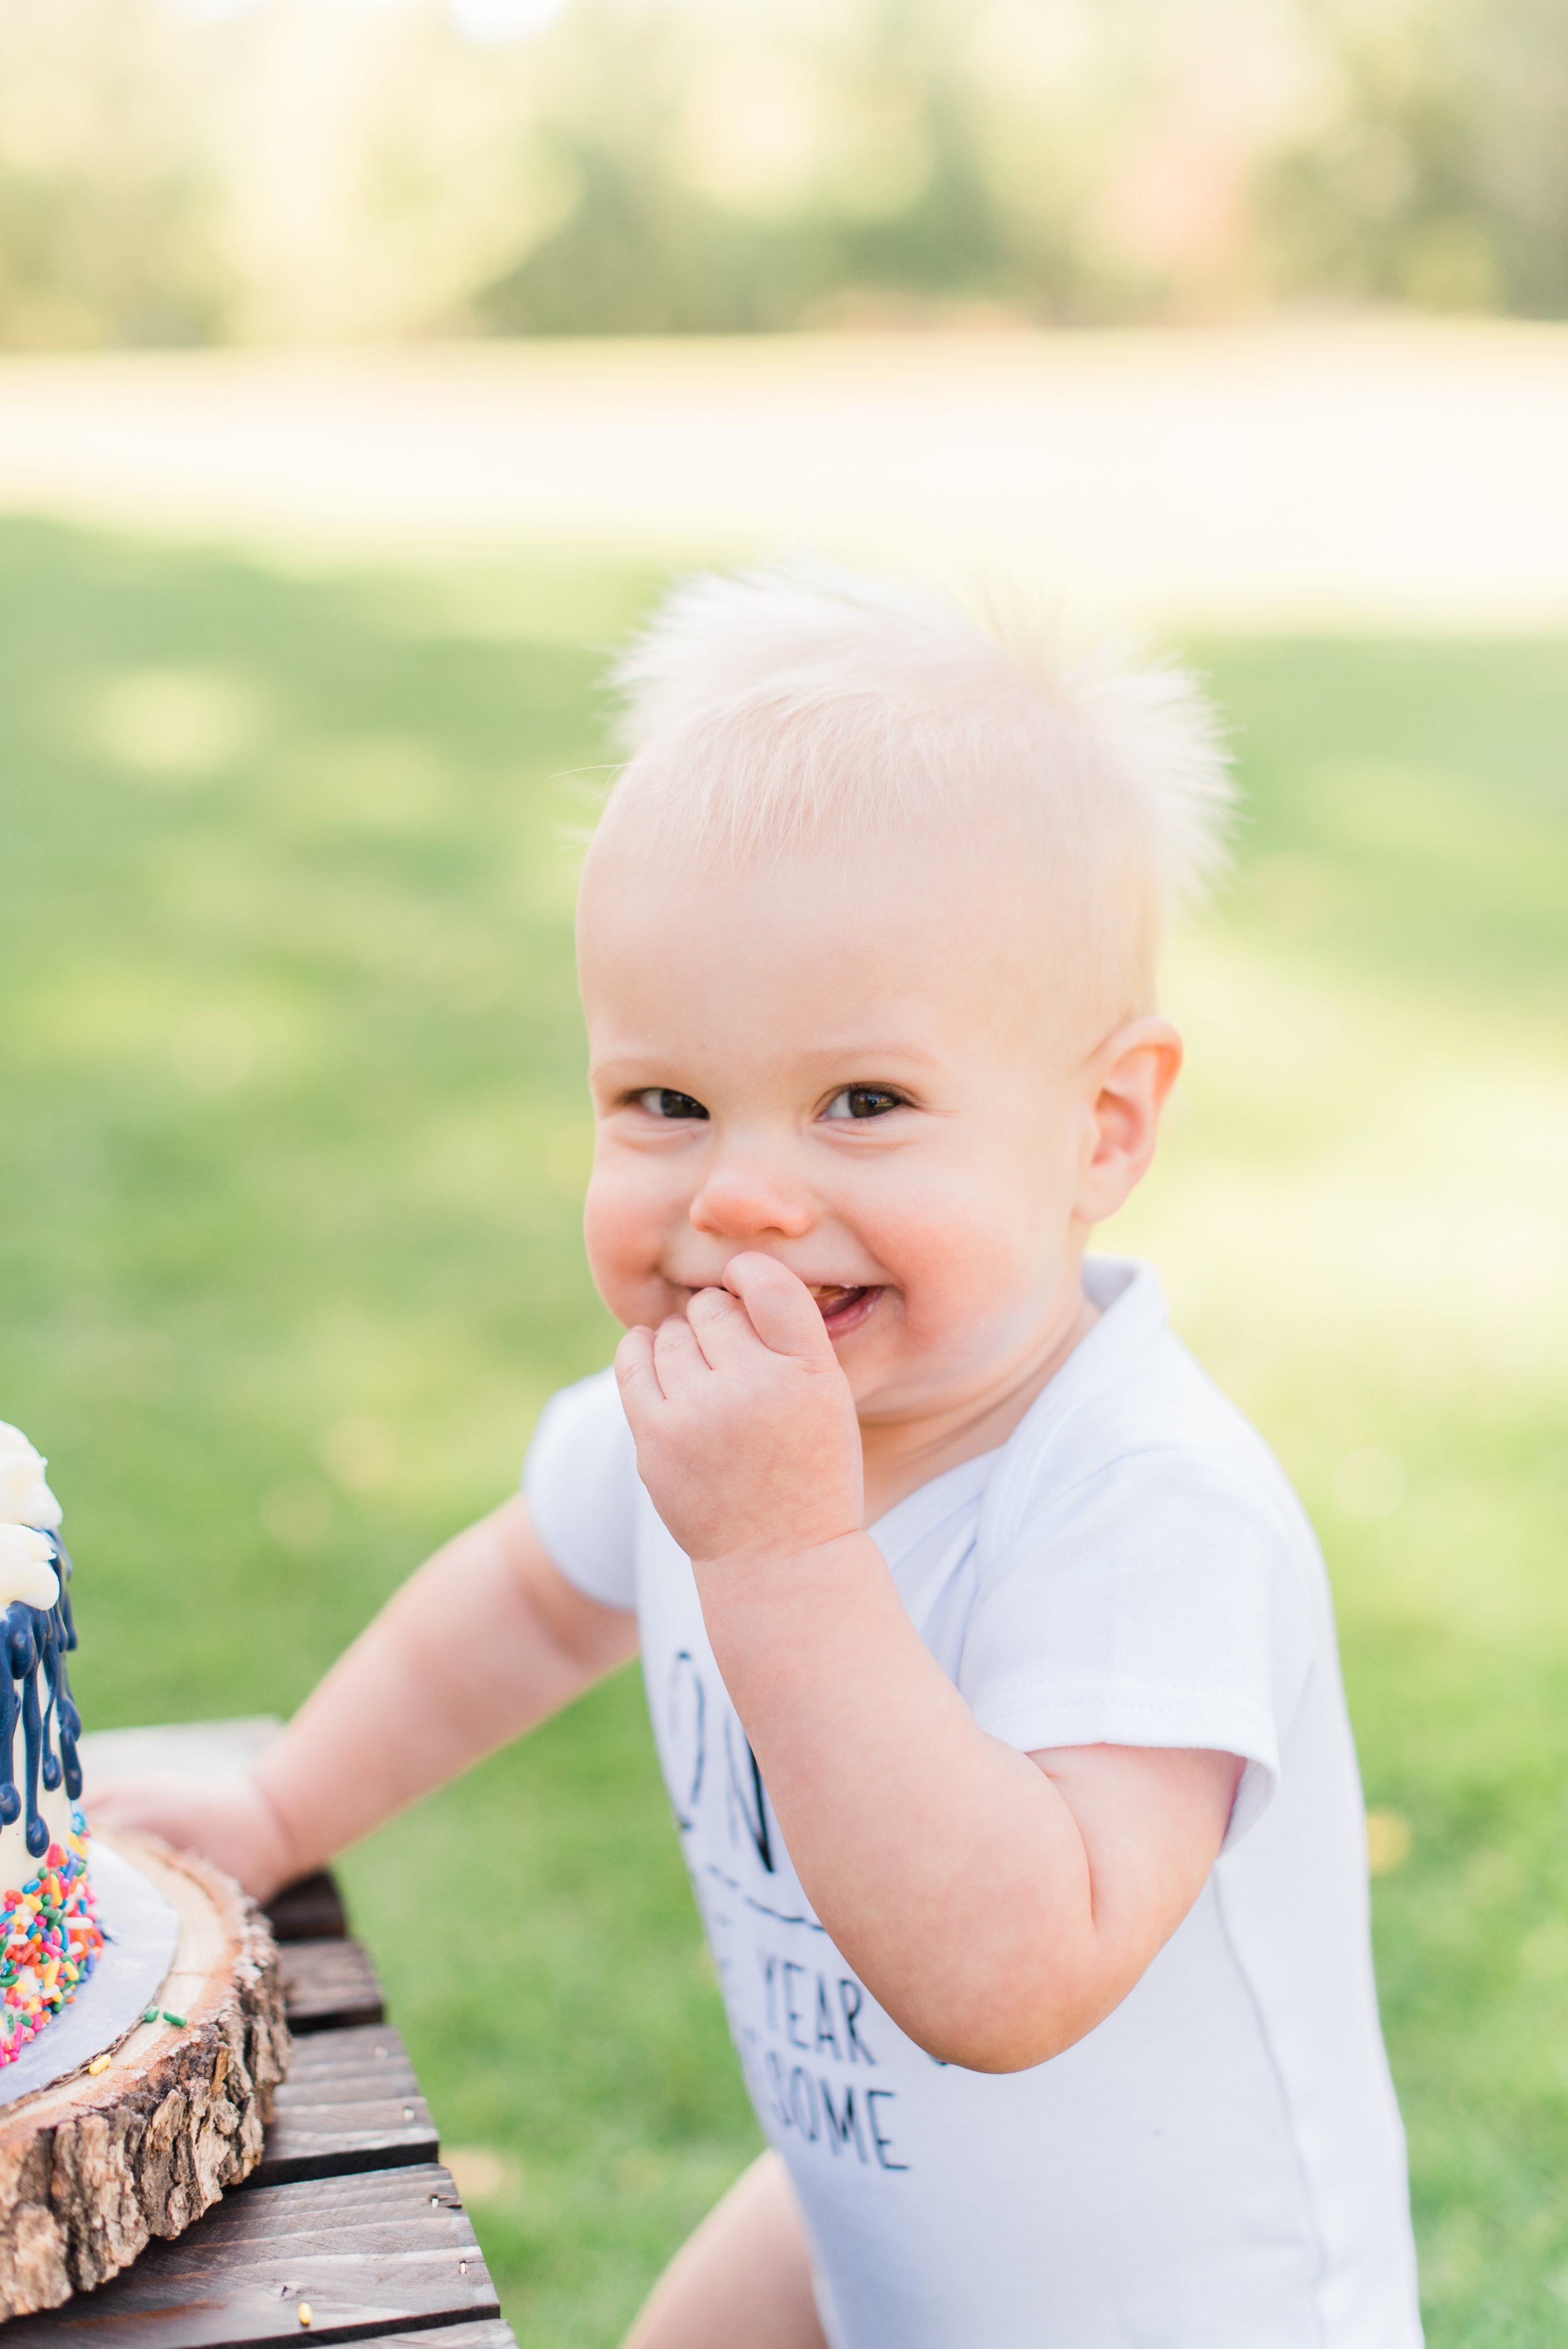  A sweet birthday boy in Peachtree City smiles during his cake smash at his first birthday party. #marylandfamilyphotographer #onlinephotographycourse #photographytips #familyphotosession #diyfamilyphotos #kidportraits #cakesmashphotos #firstbirthday